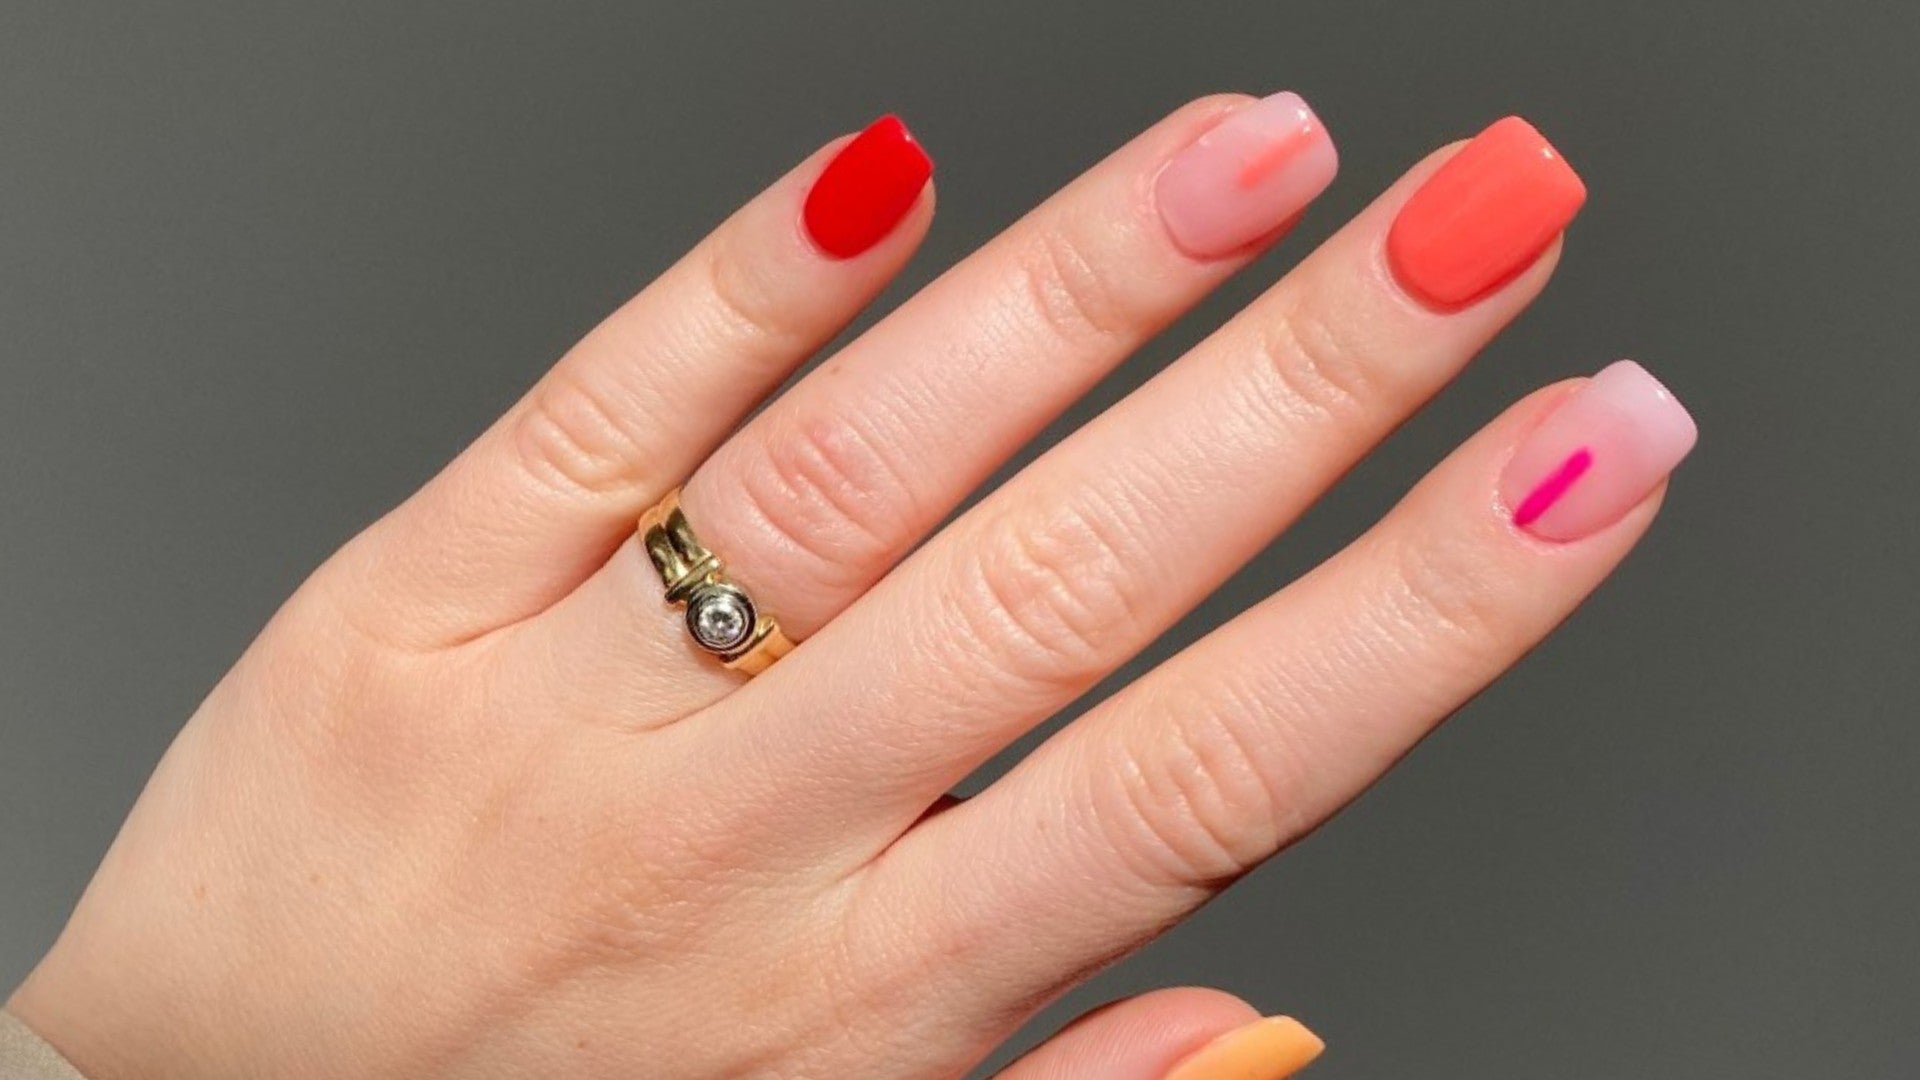 Summer nail designs: Creative ideas for radiant nails